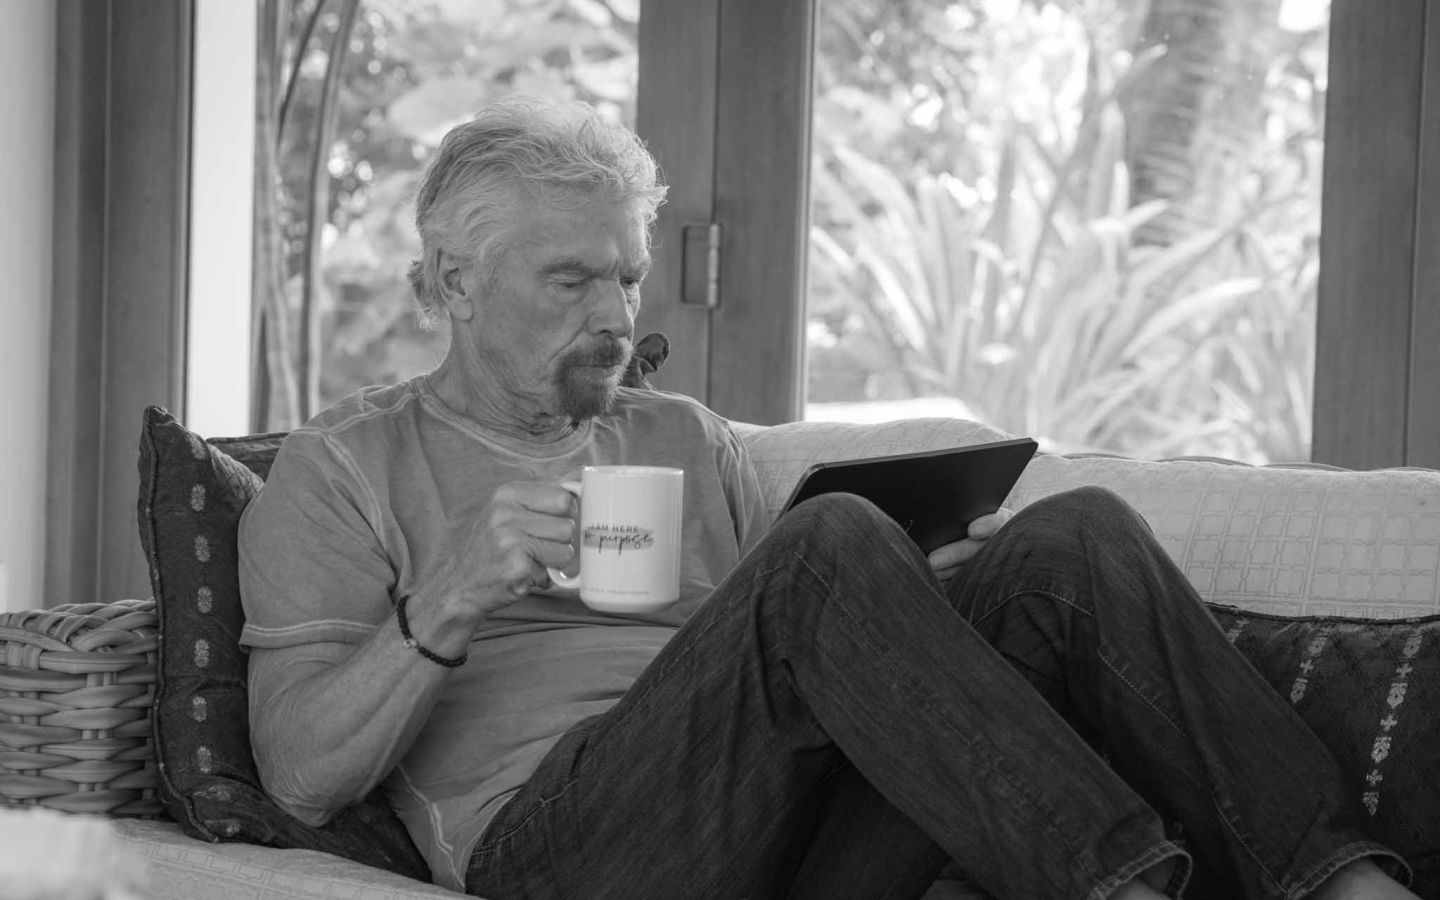 Richard Branson reading his ipad while having a cup of tea